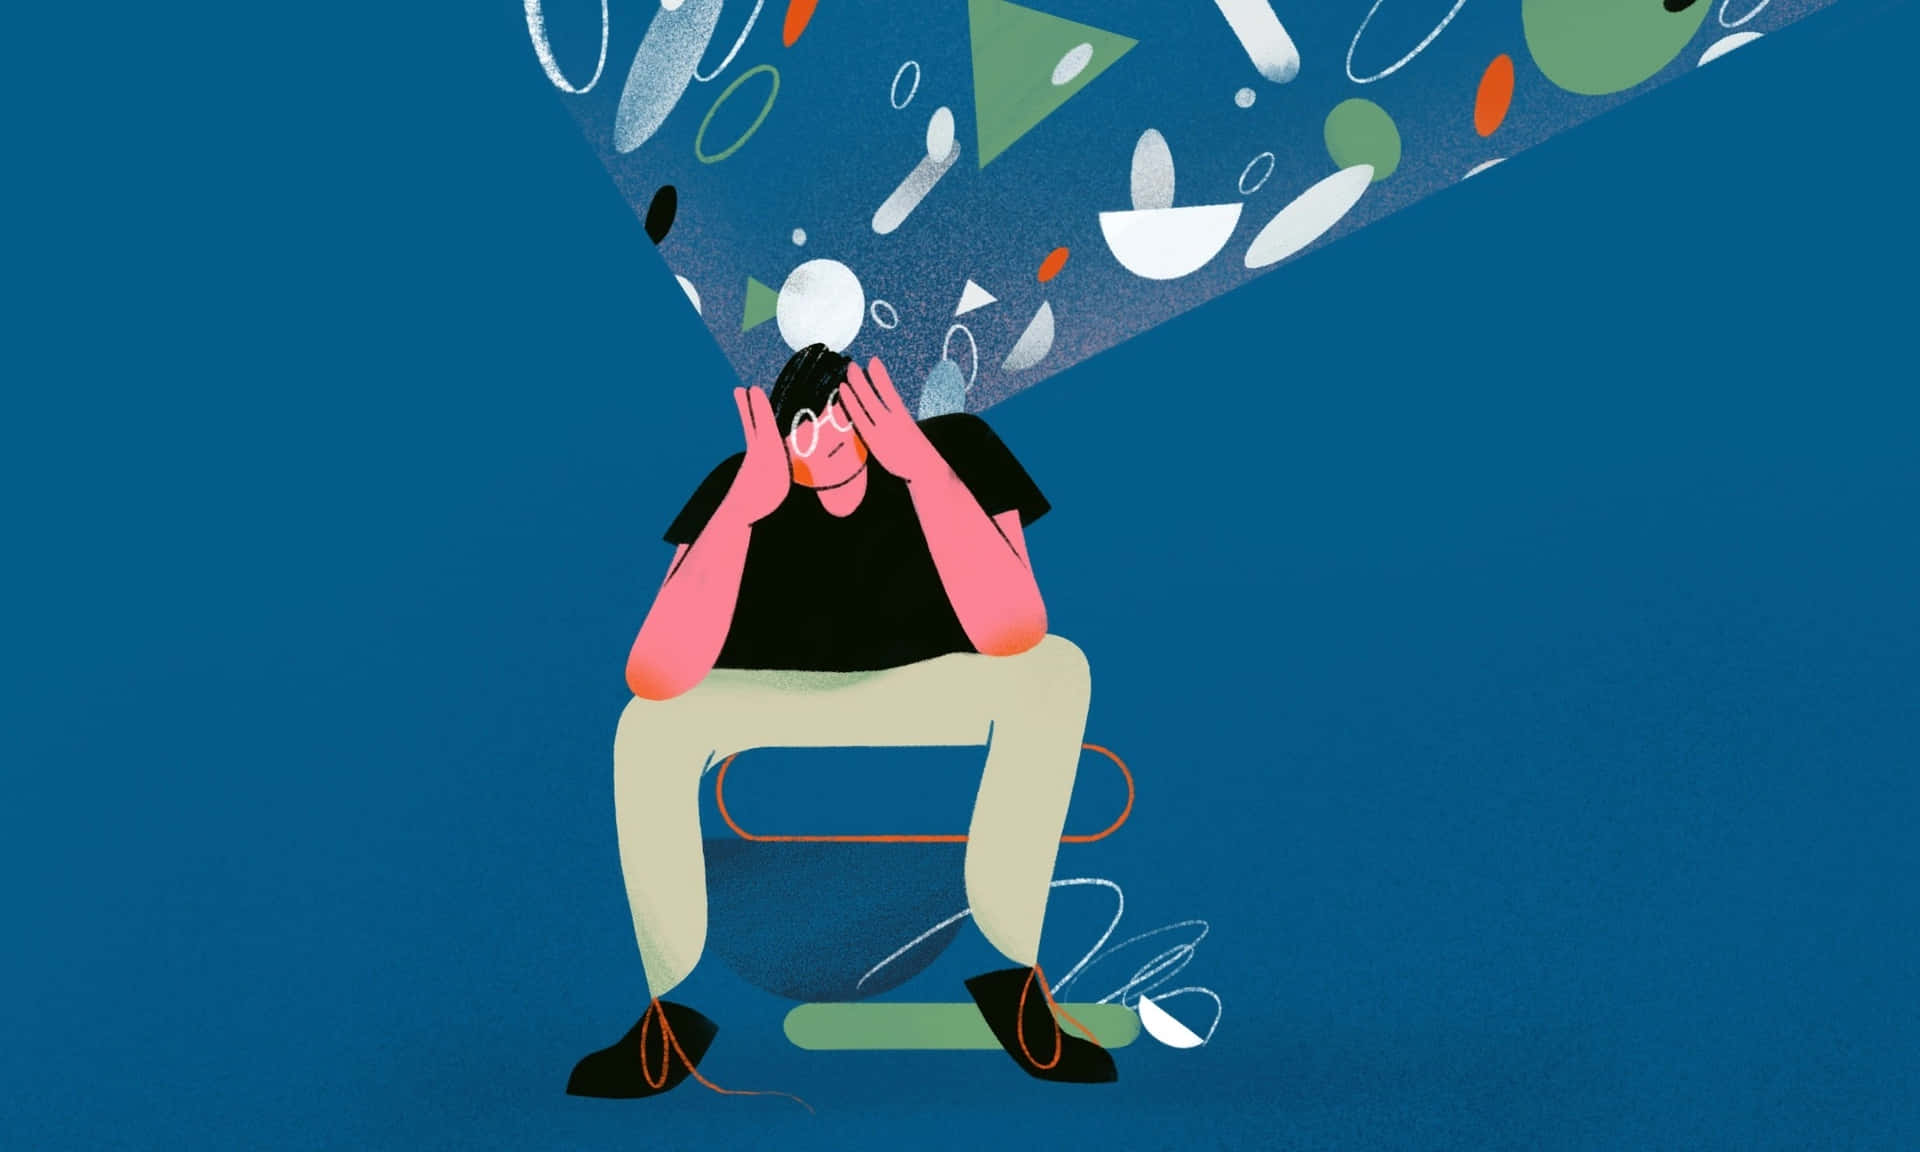 Illustration Of A Man Sitting On A Chair With A Head Full Of Objects